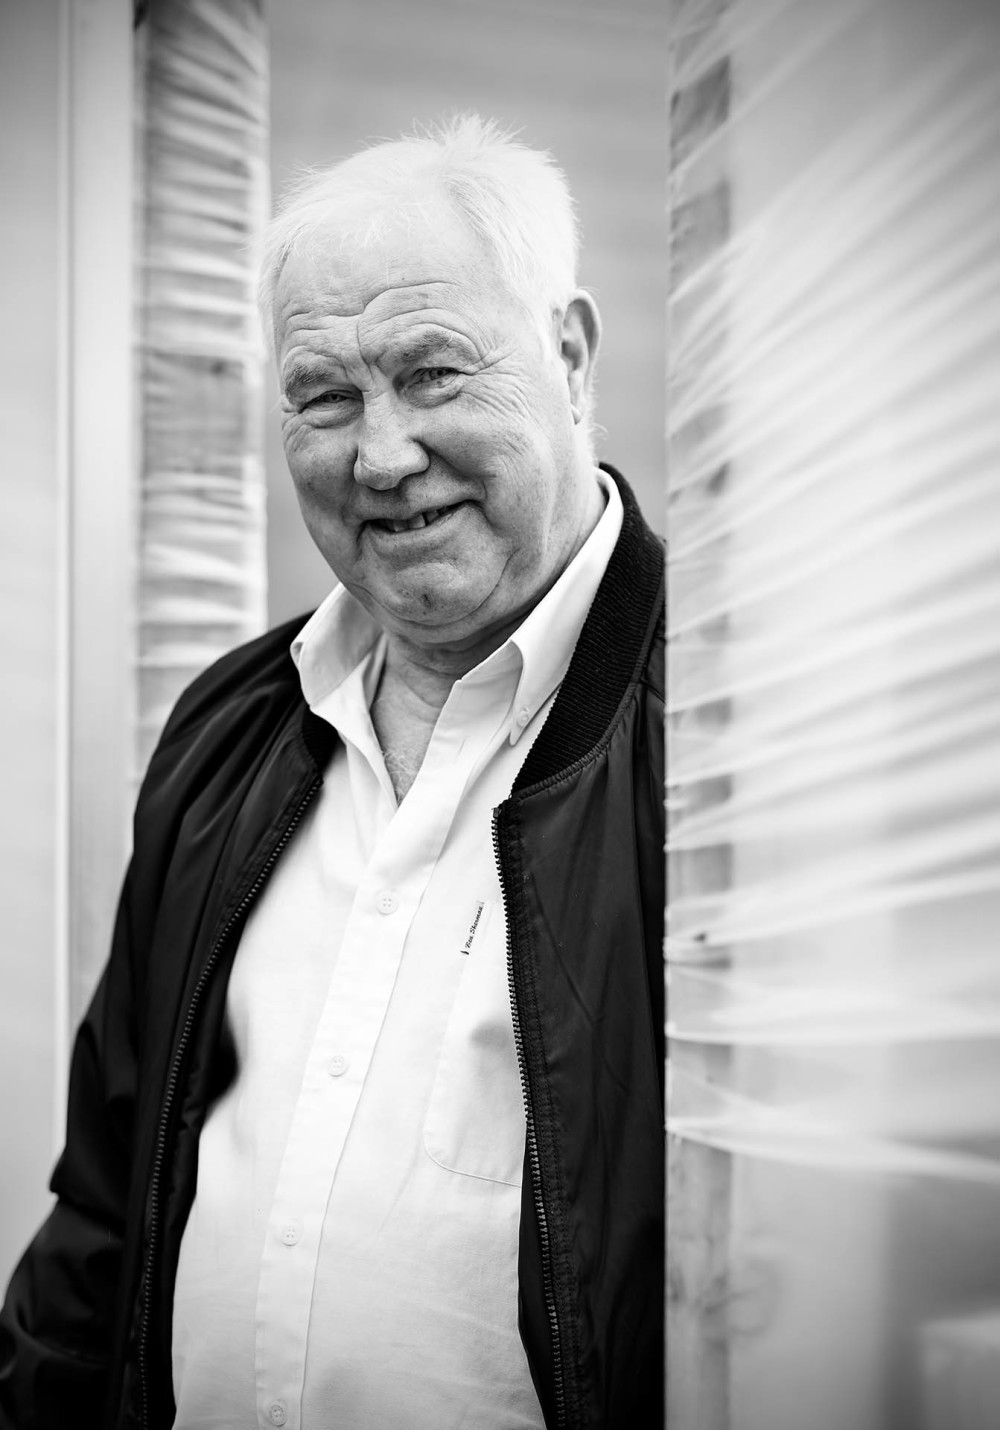 Stephen, a service user at Men's Shed, Paisley. Photographed for Shelter Scotland's 50th anniversary by Melissa Mitchell.